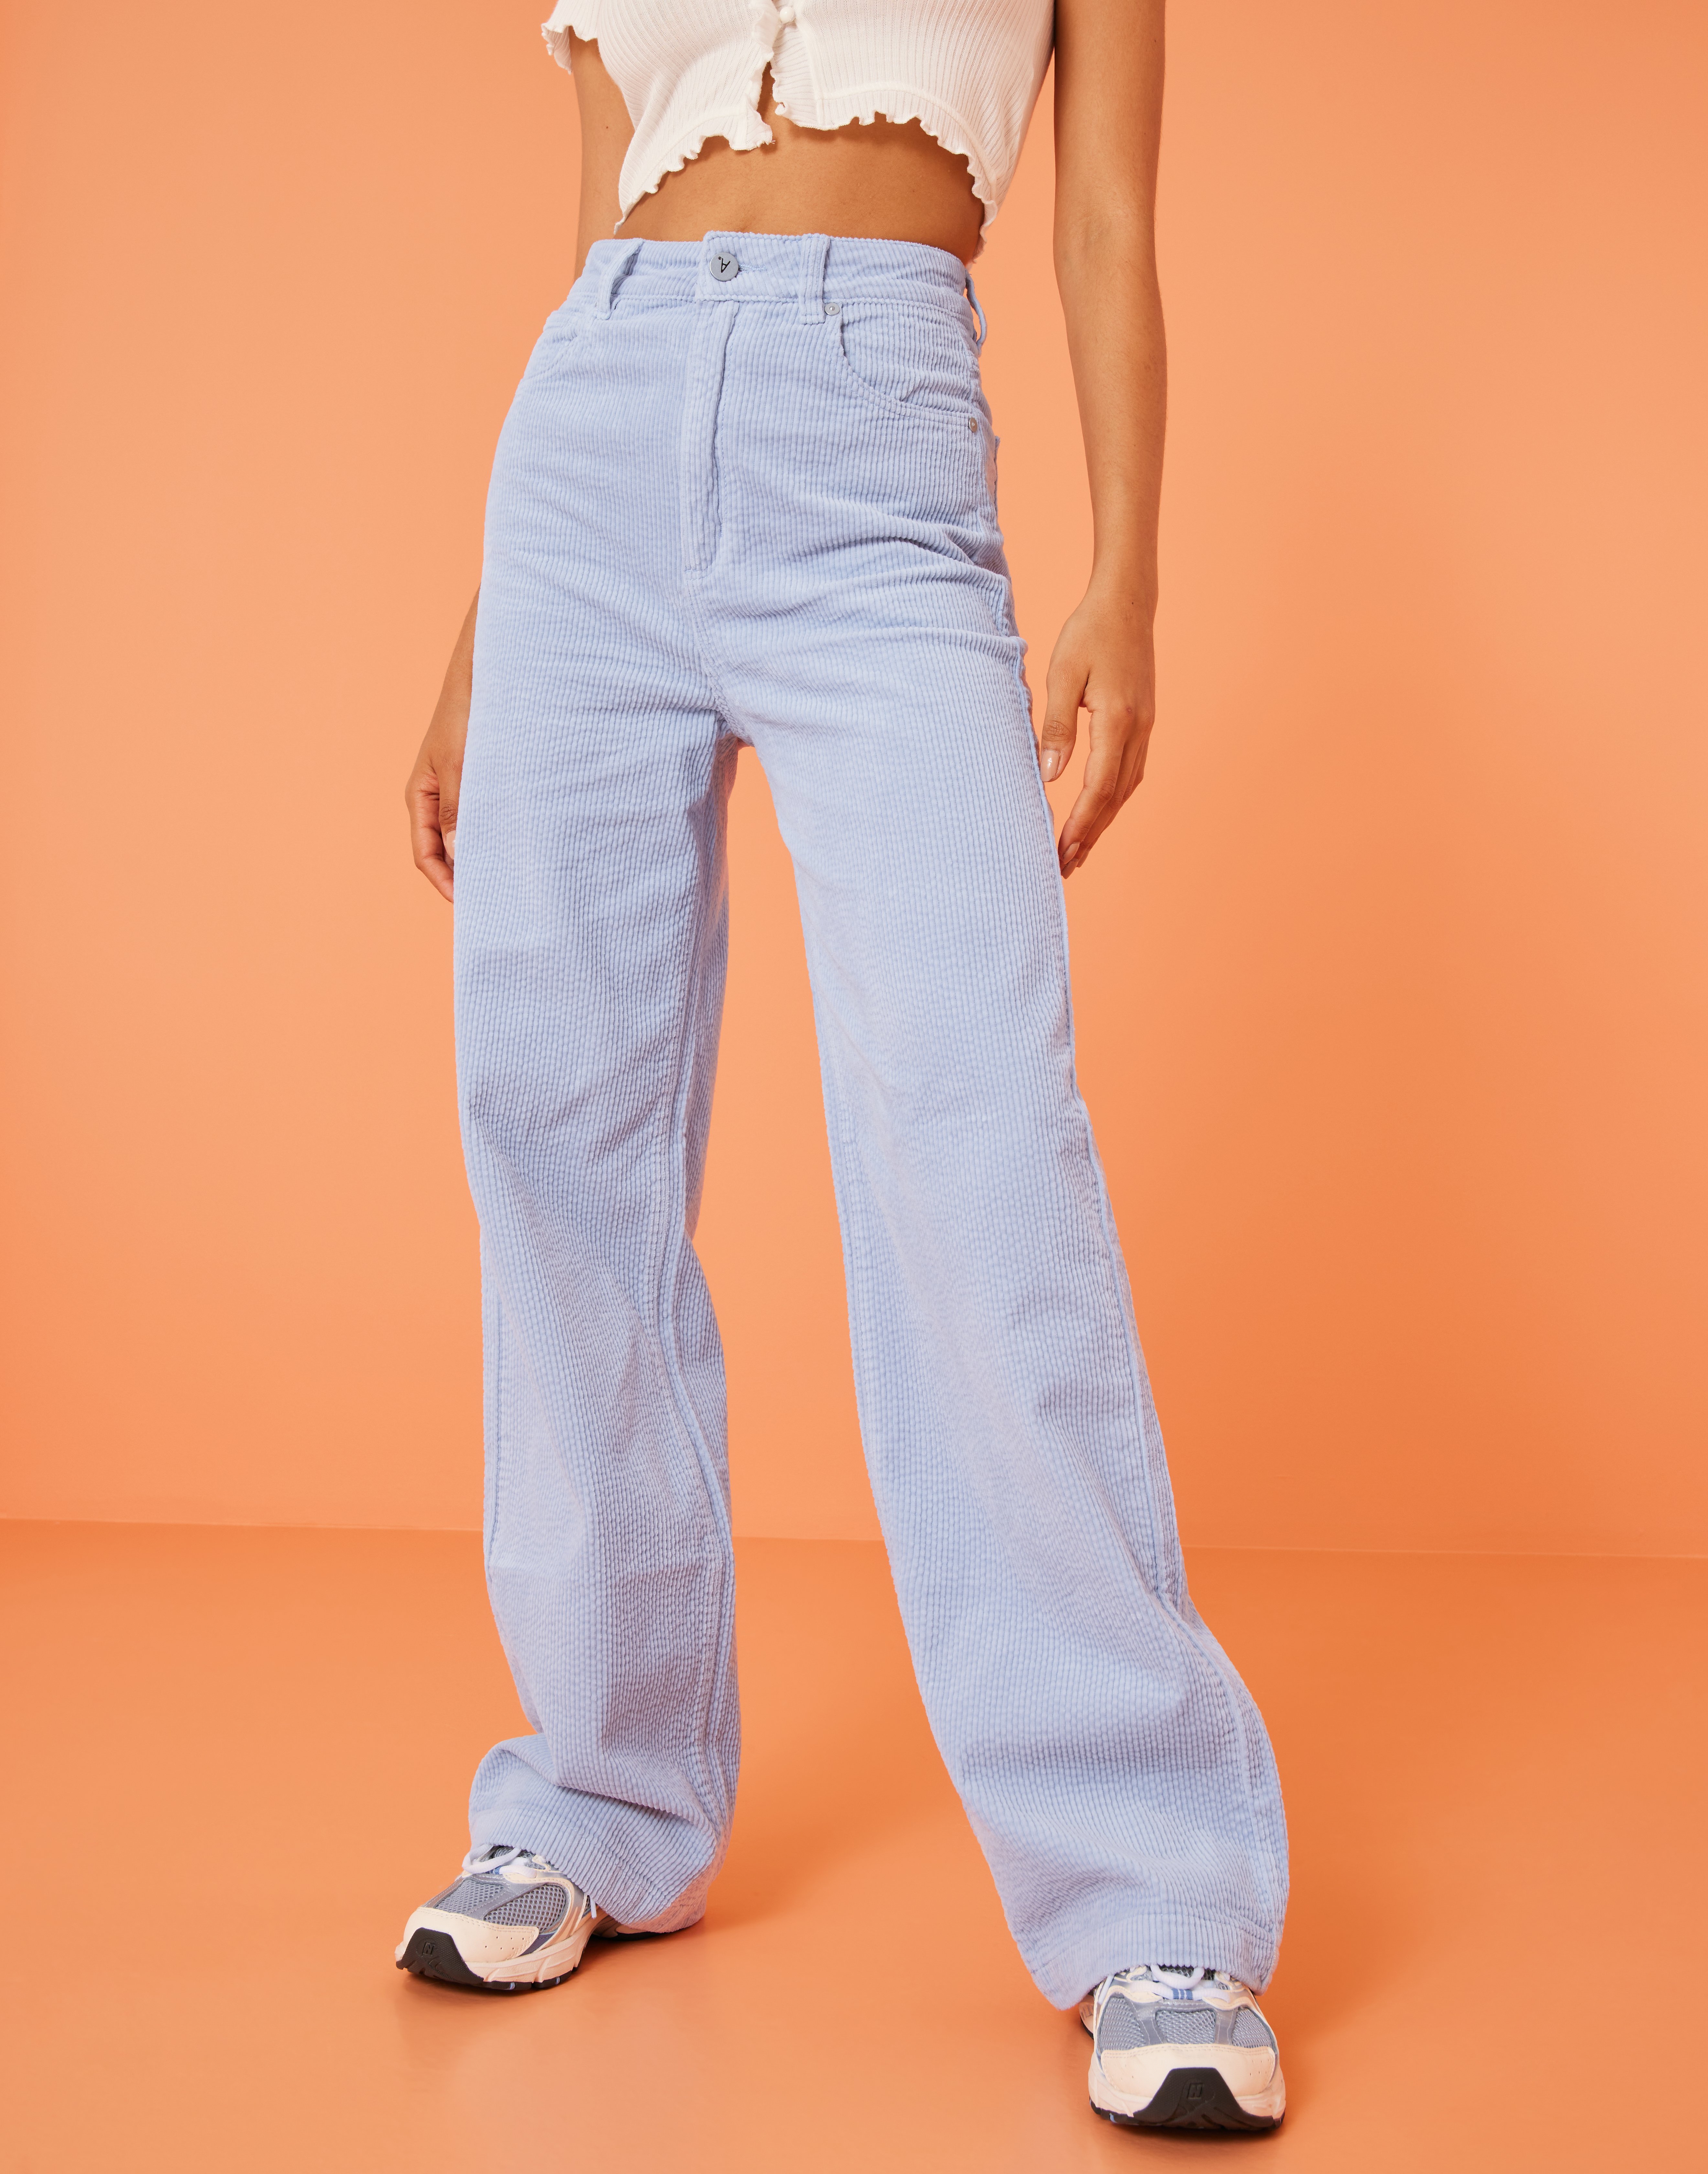 Abrand Jeans - High waisted jeans - A 94 High & Wide - Jeans